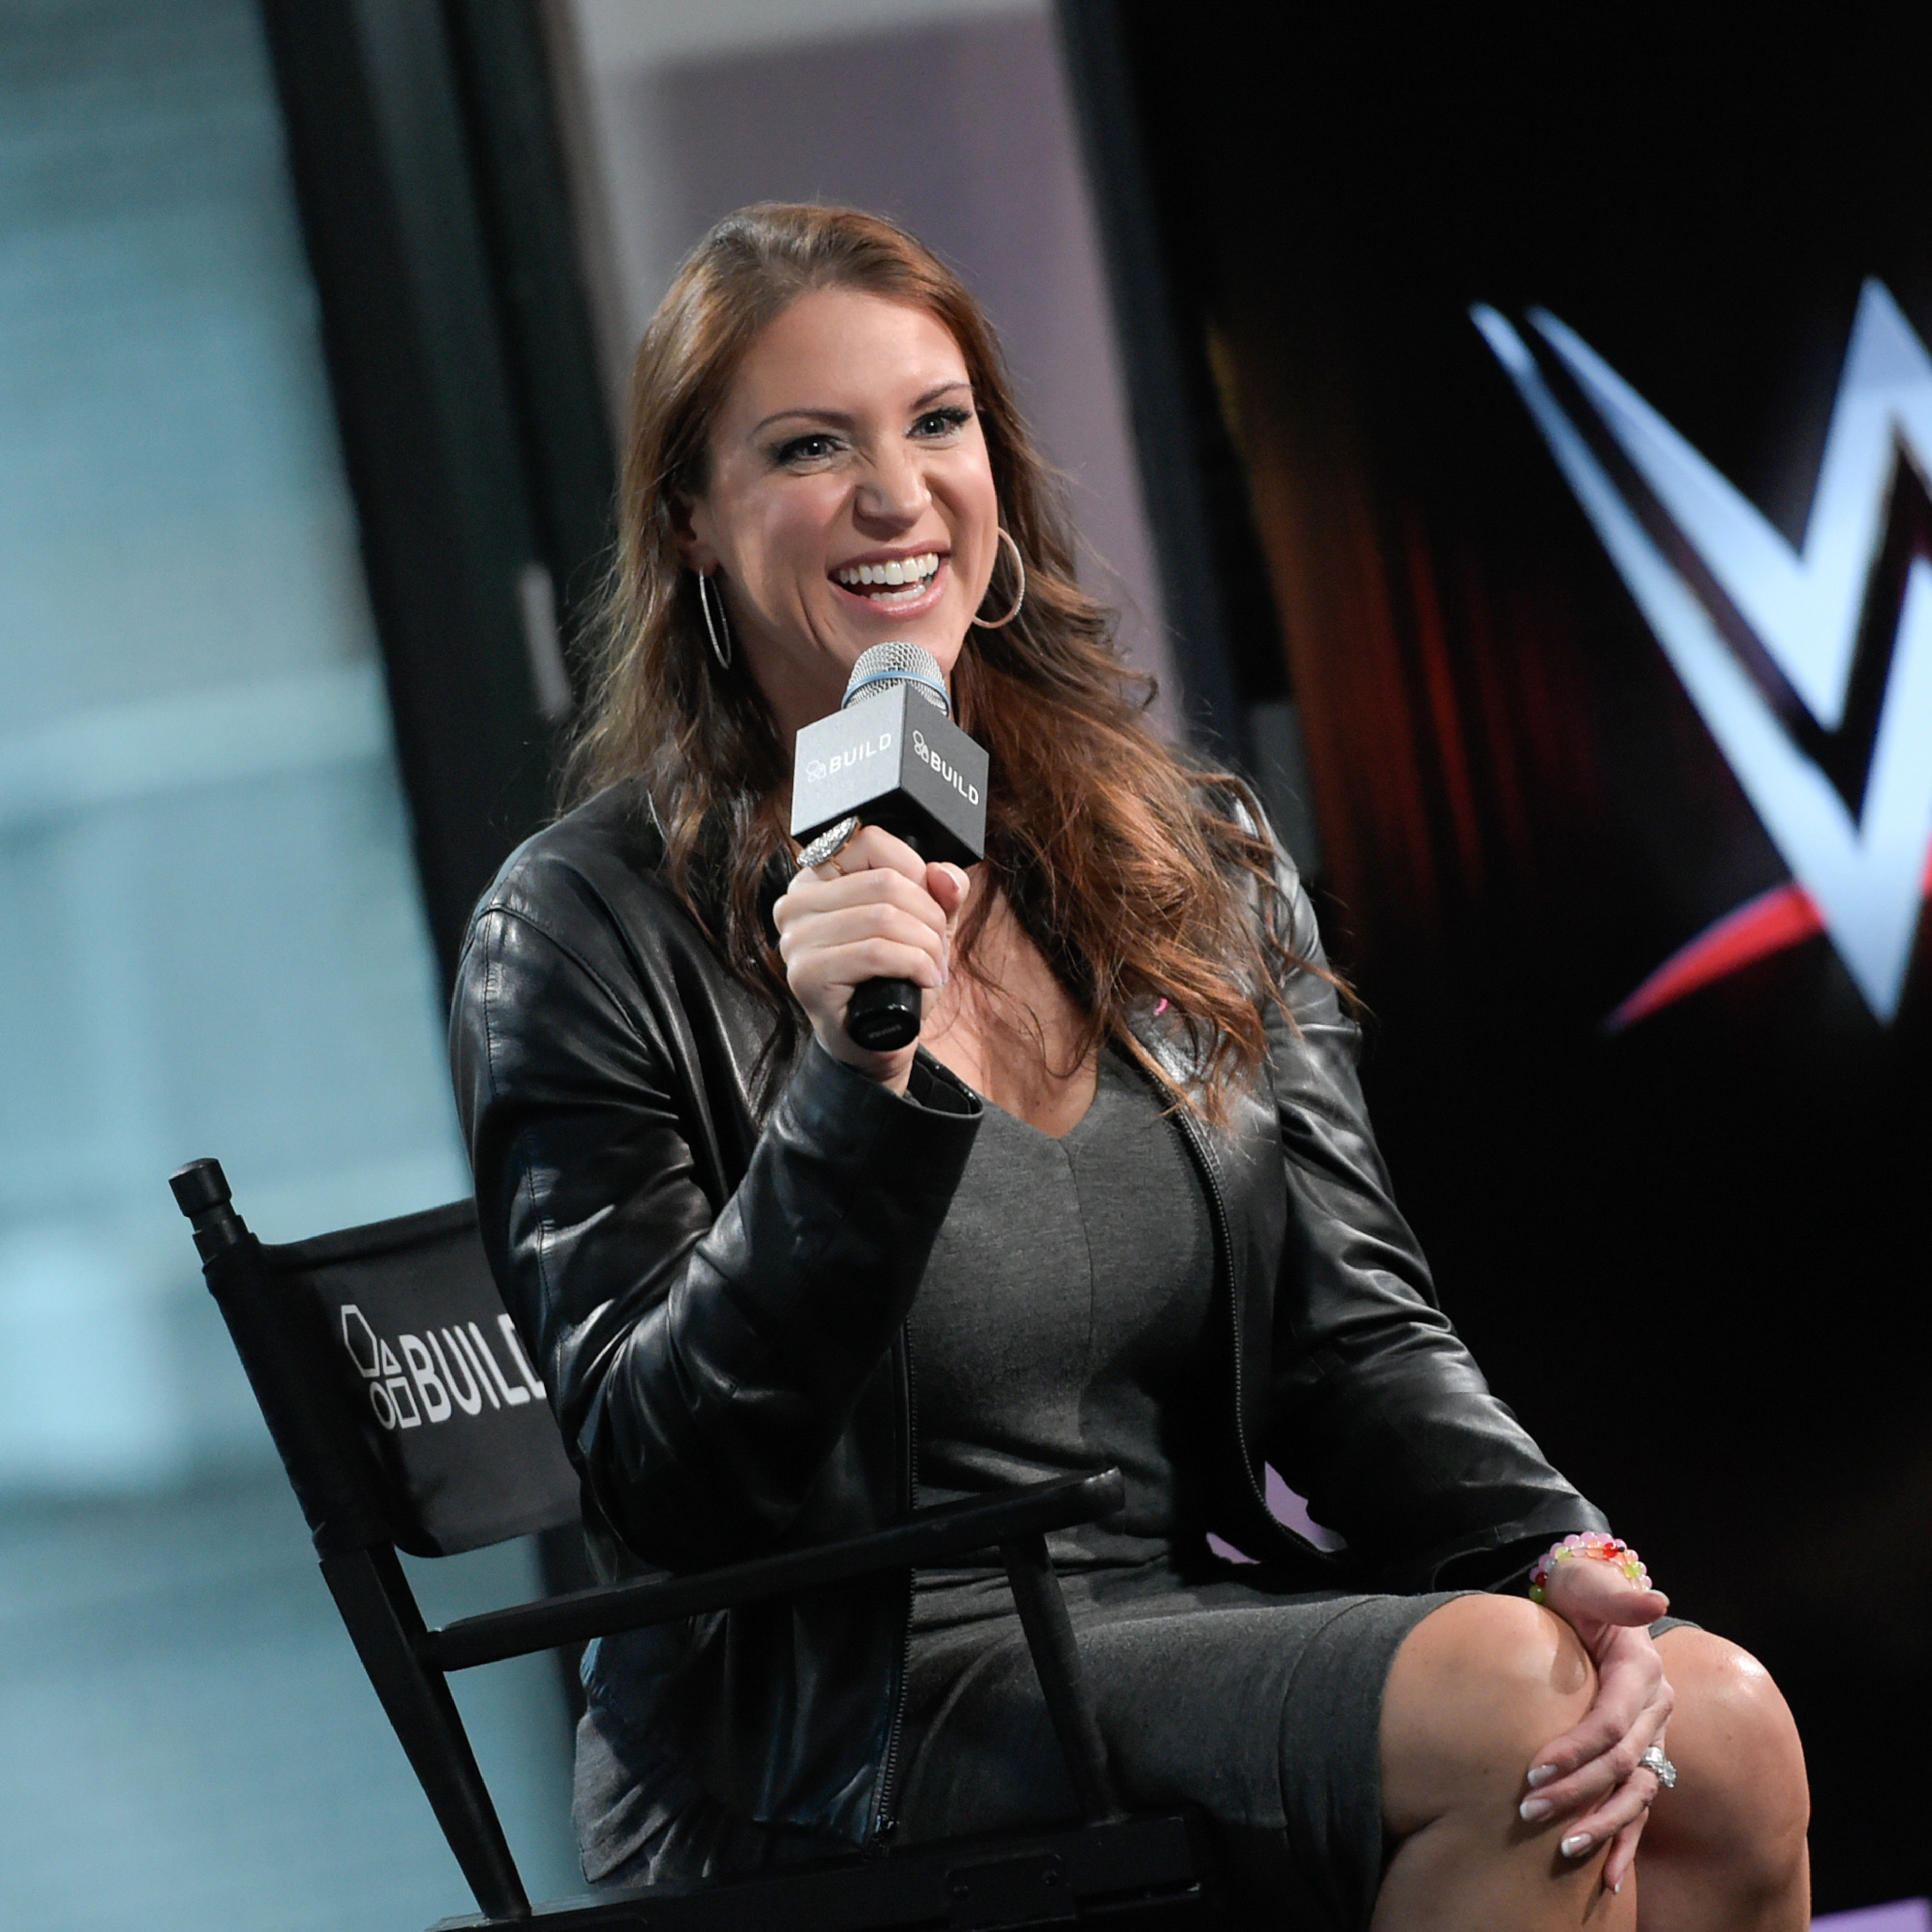 WWE Rumors: Reason for Stephanie McMahon’s Leave ‘Isn’t Going to Be a Public Scandal’